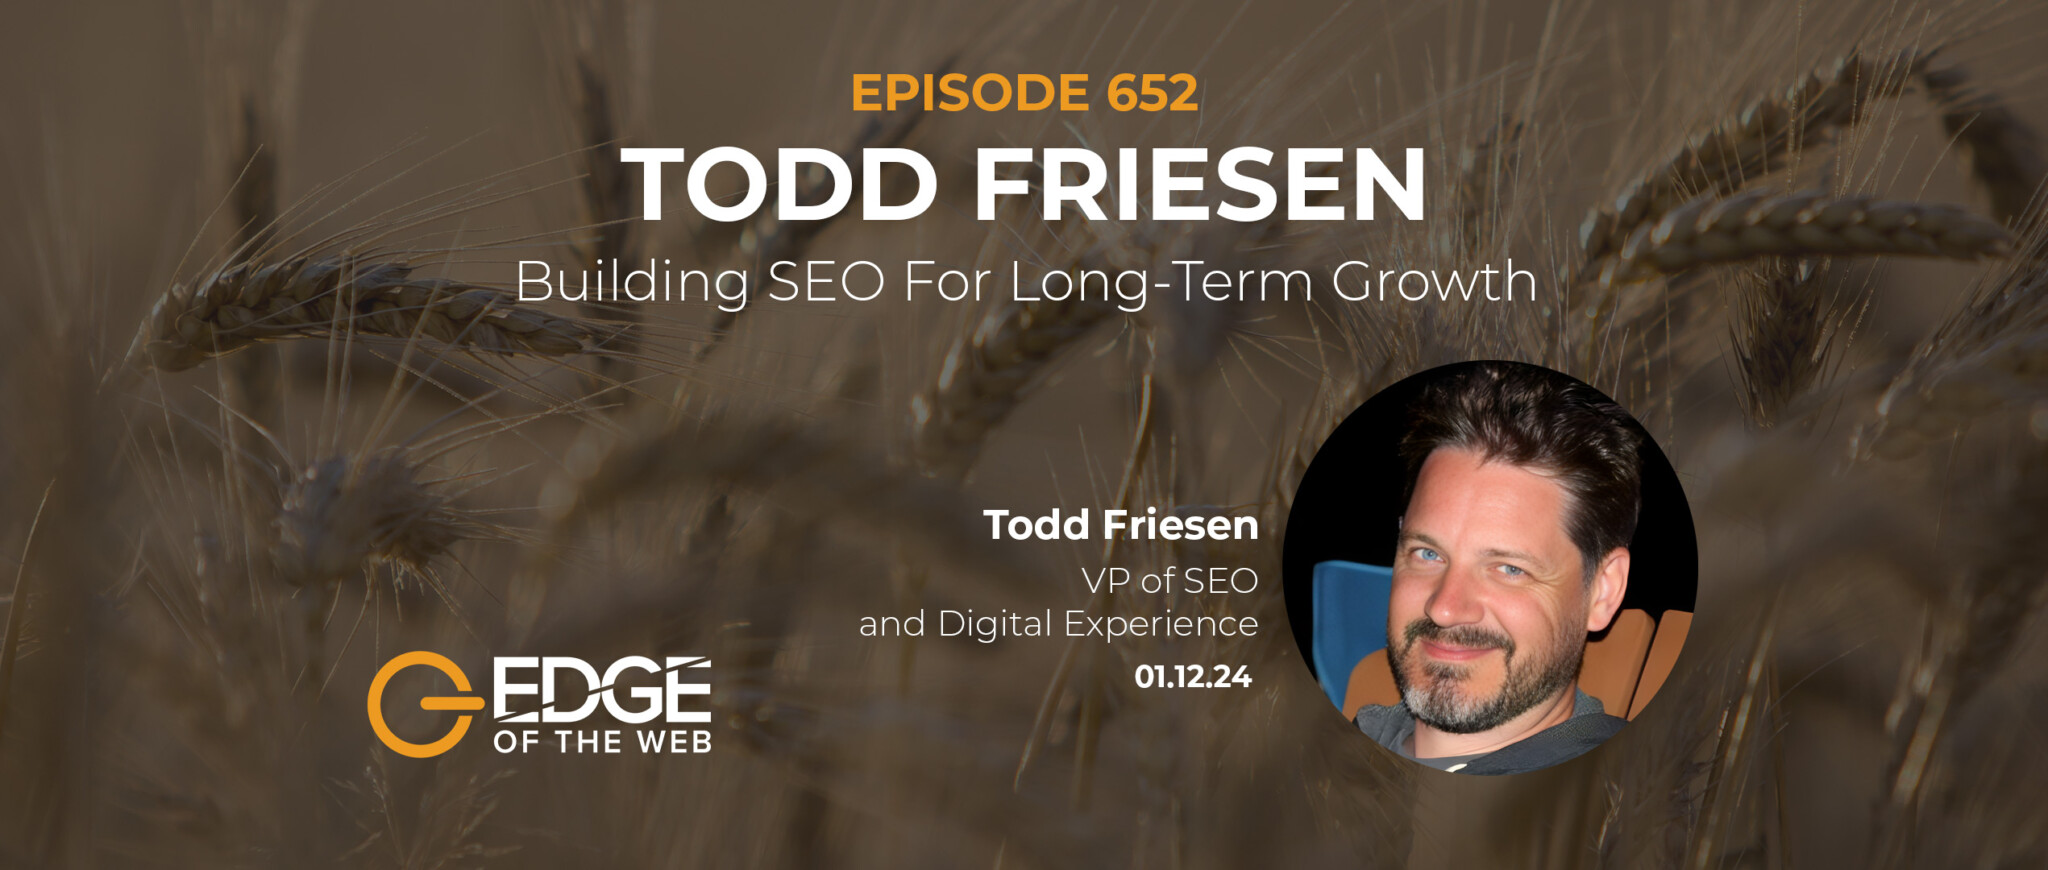 Episode 652: Building SEO For Long-Term Growth w/ Todd Friesen